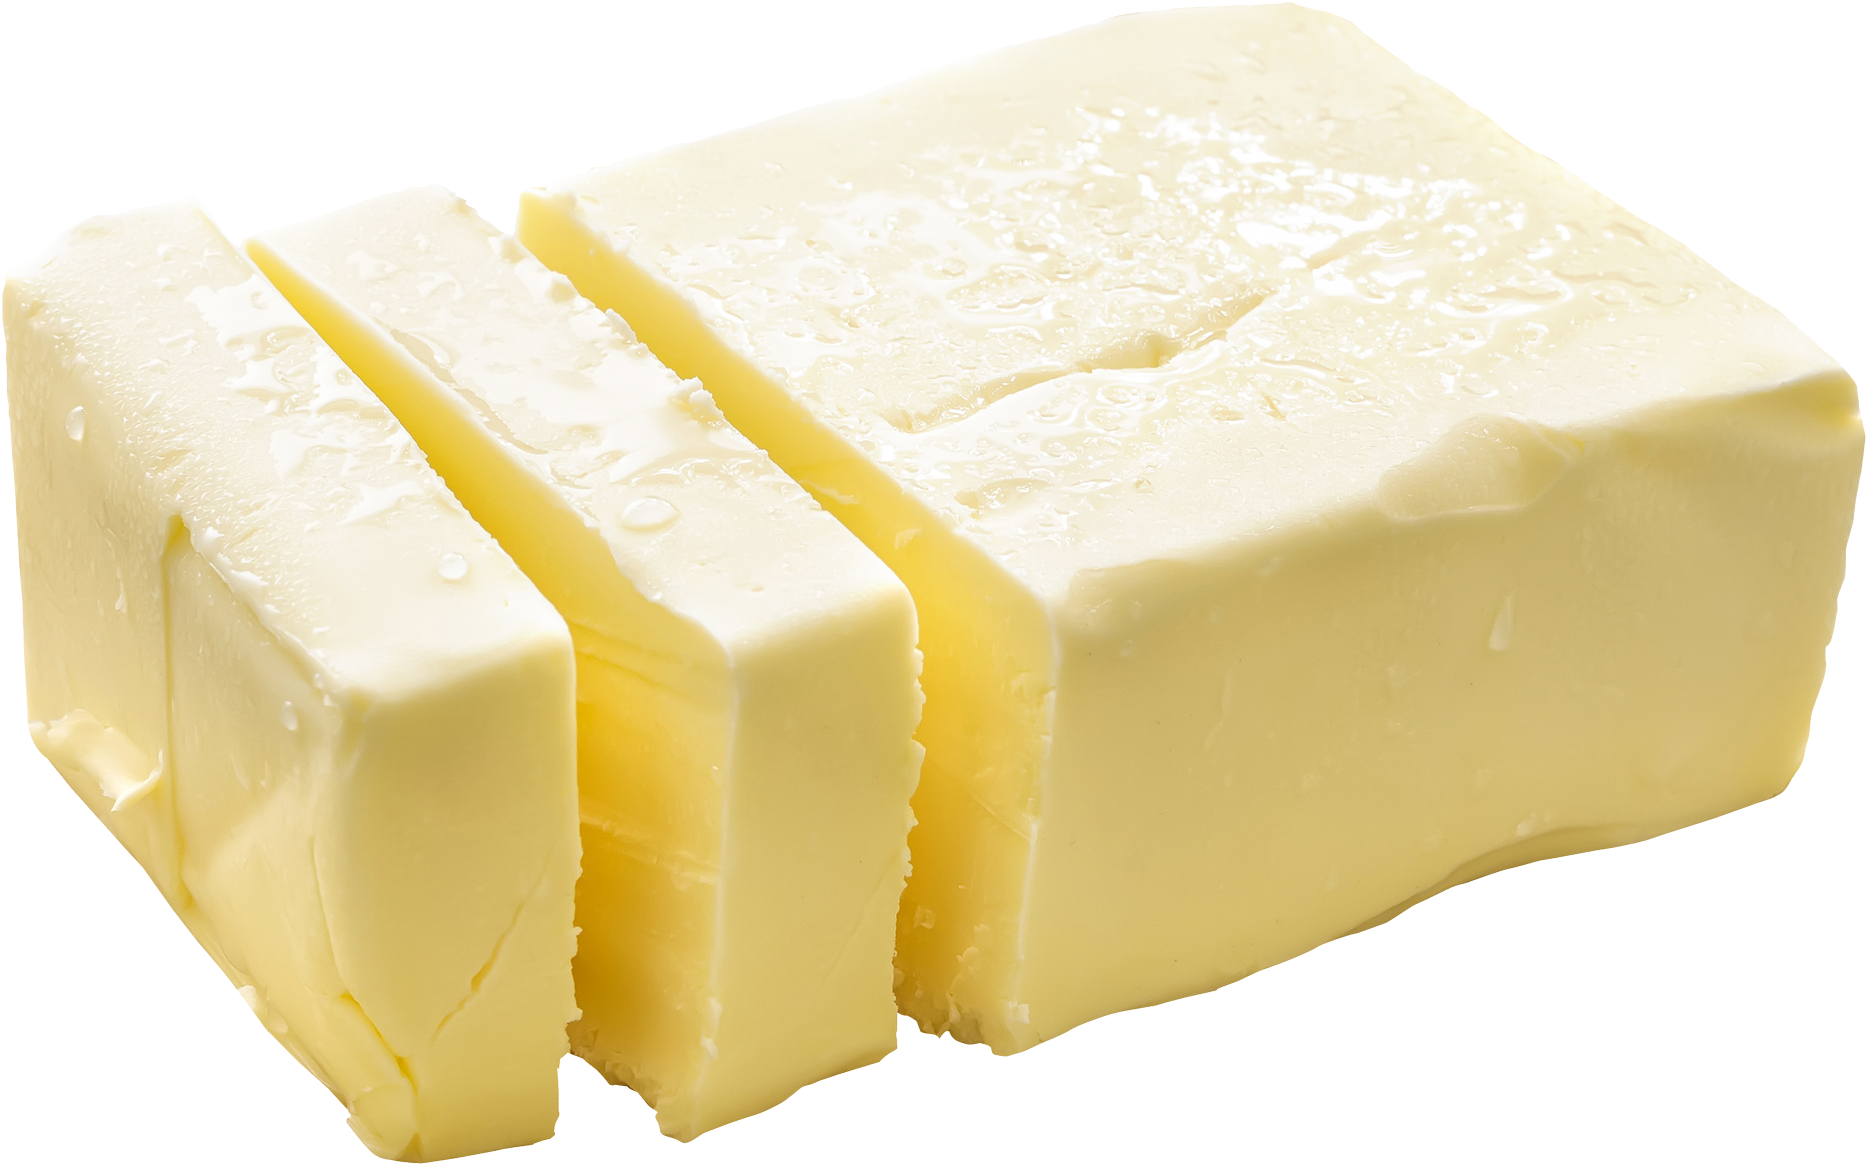 A Block Of Butter With Two Slices